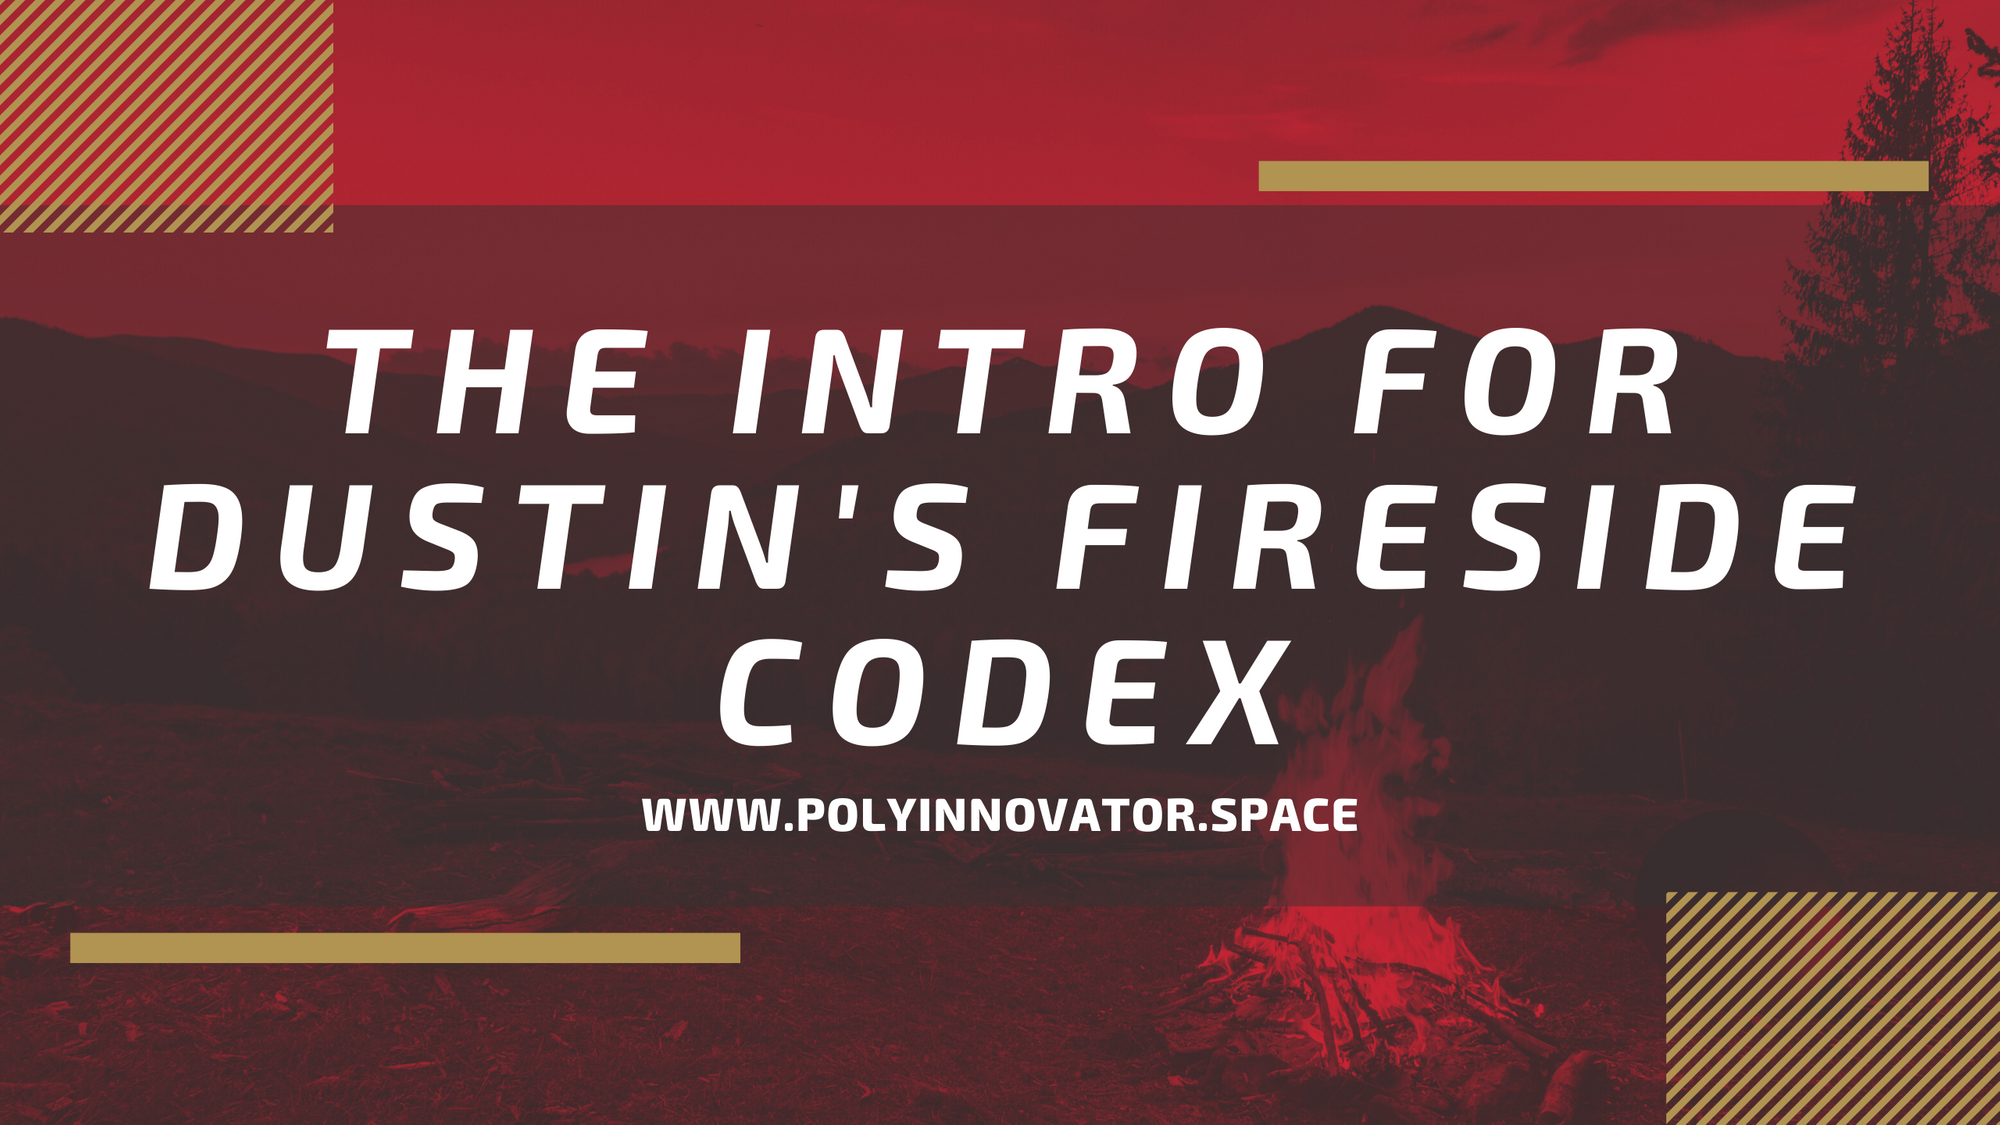 The Intro for Dustin's Fireside Codex